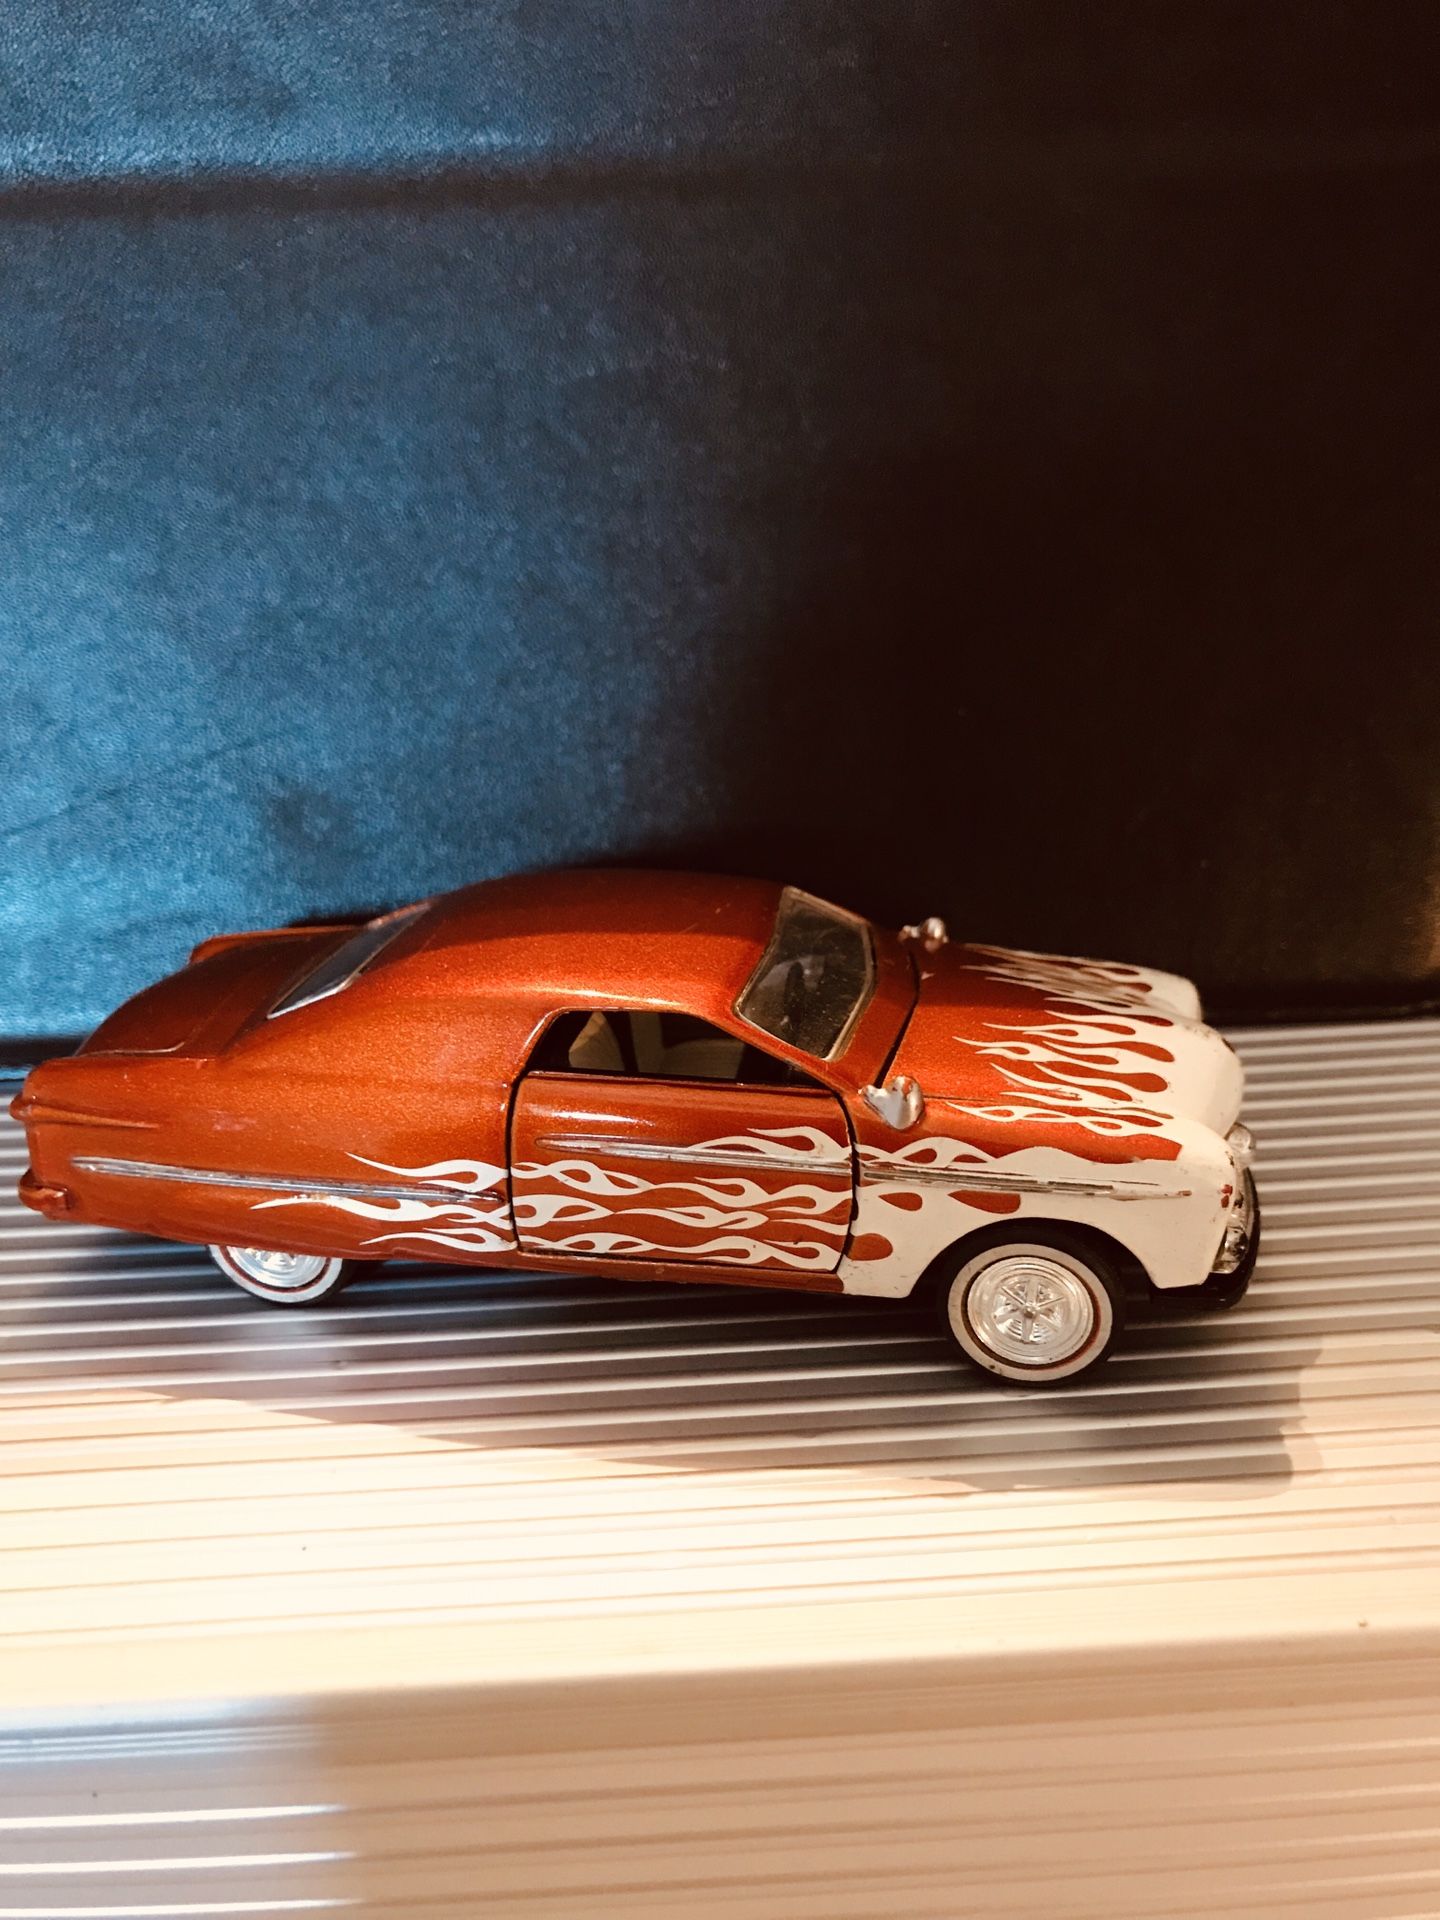 Tins Toys 1949/50 Ford Custom Street Rod 1/38 Scale Please View pics and read description